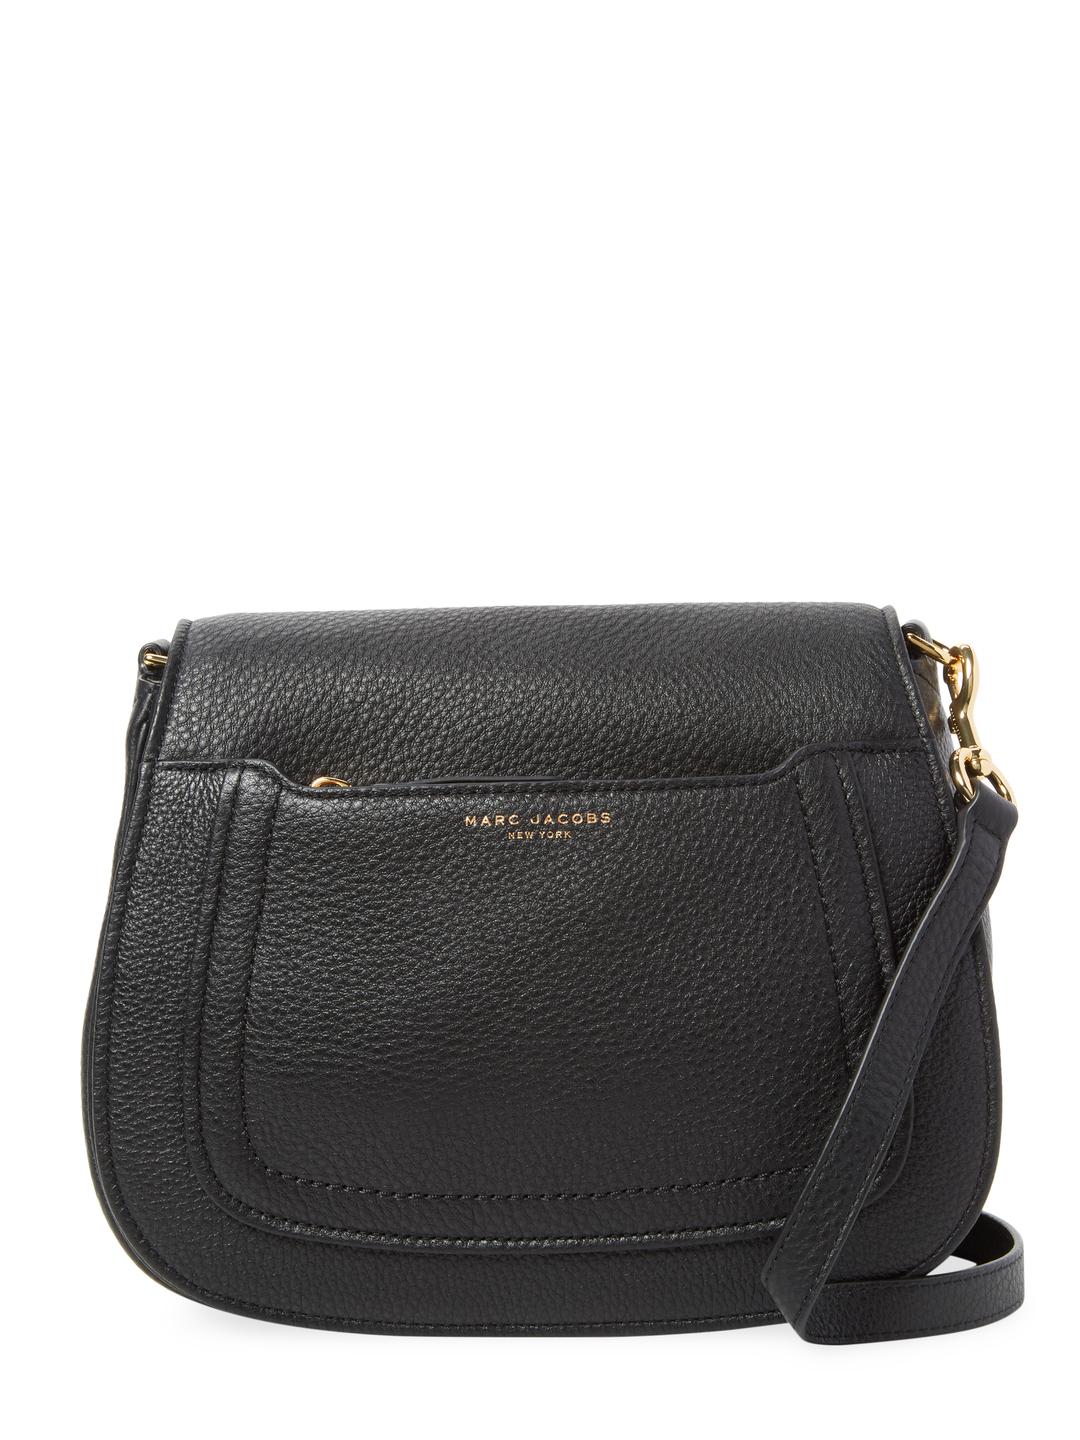 Marc Jacobs Black Backpack Purse | Paul Smith